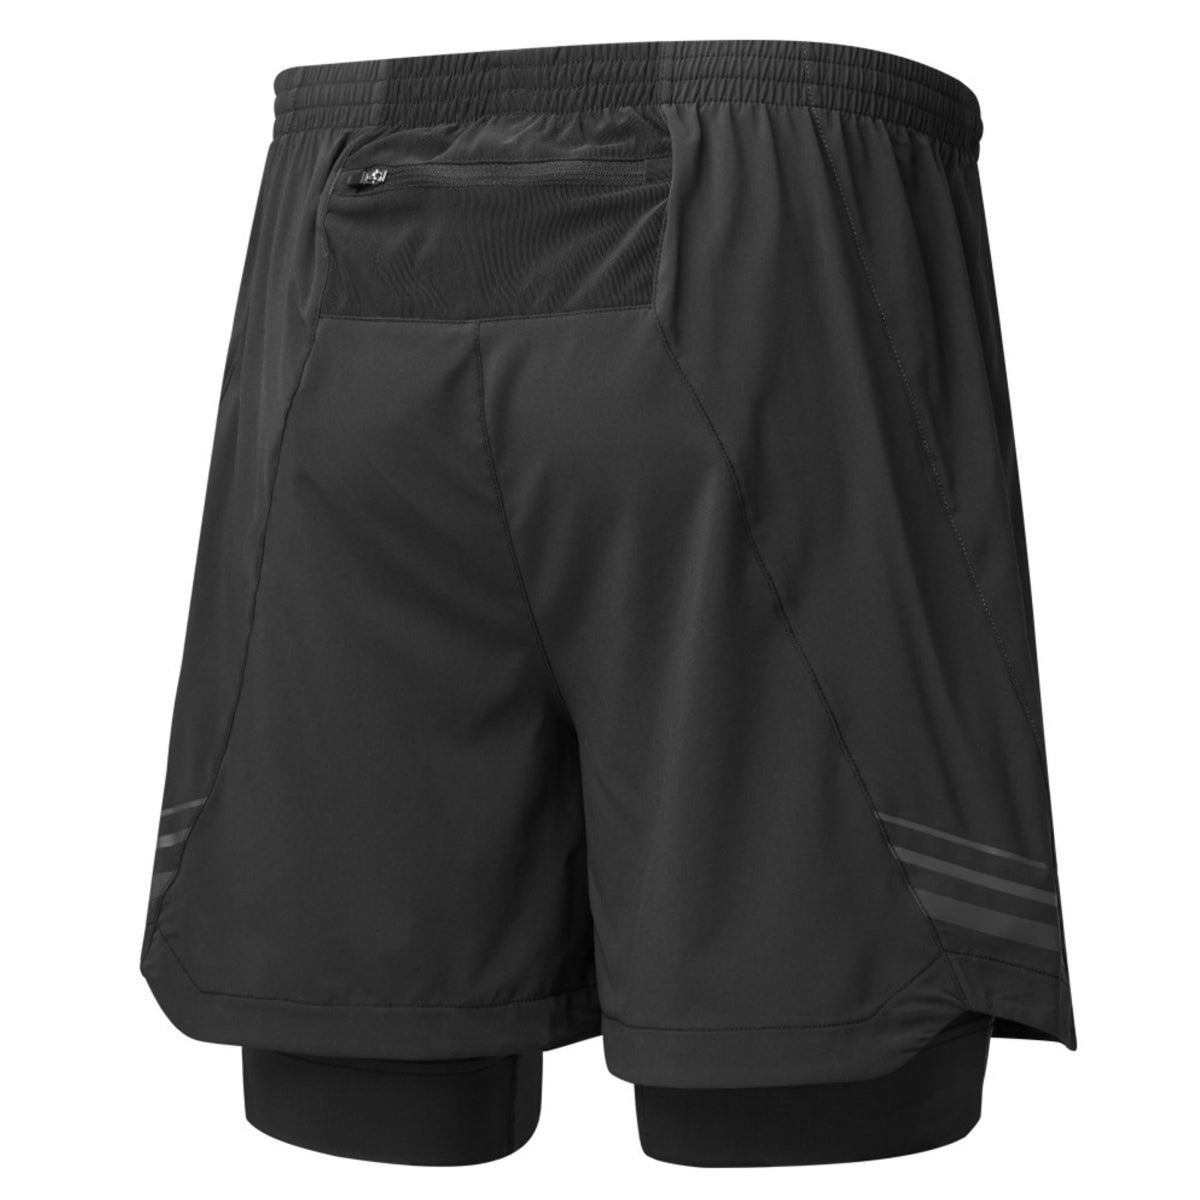 Ronhill Mens Stride Twin 5inch Running Shorts